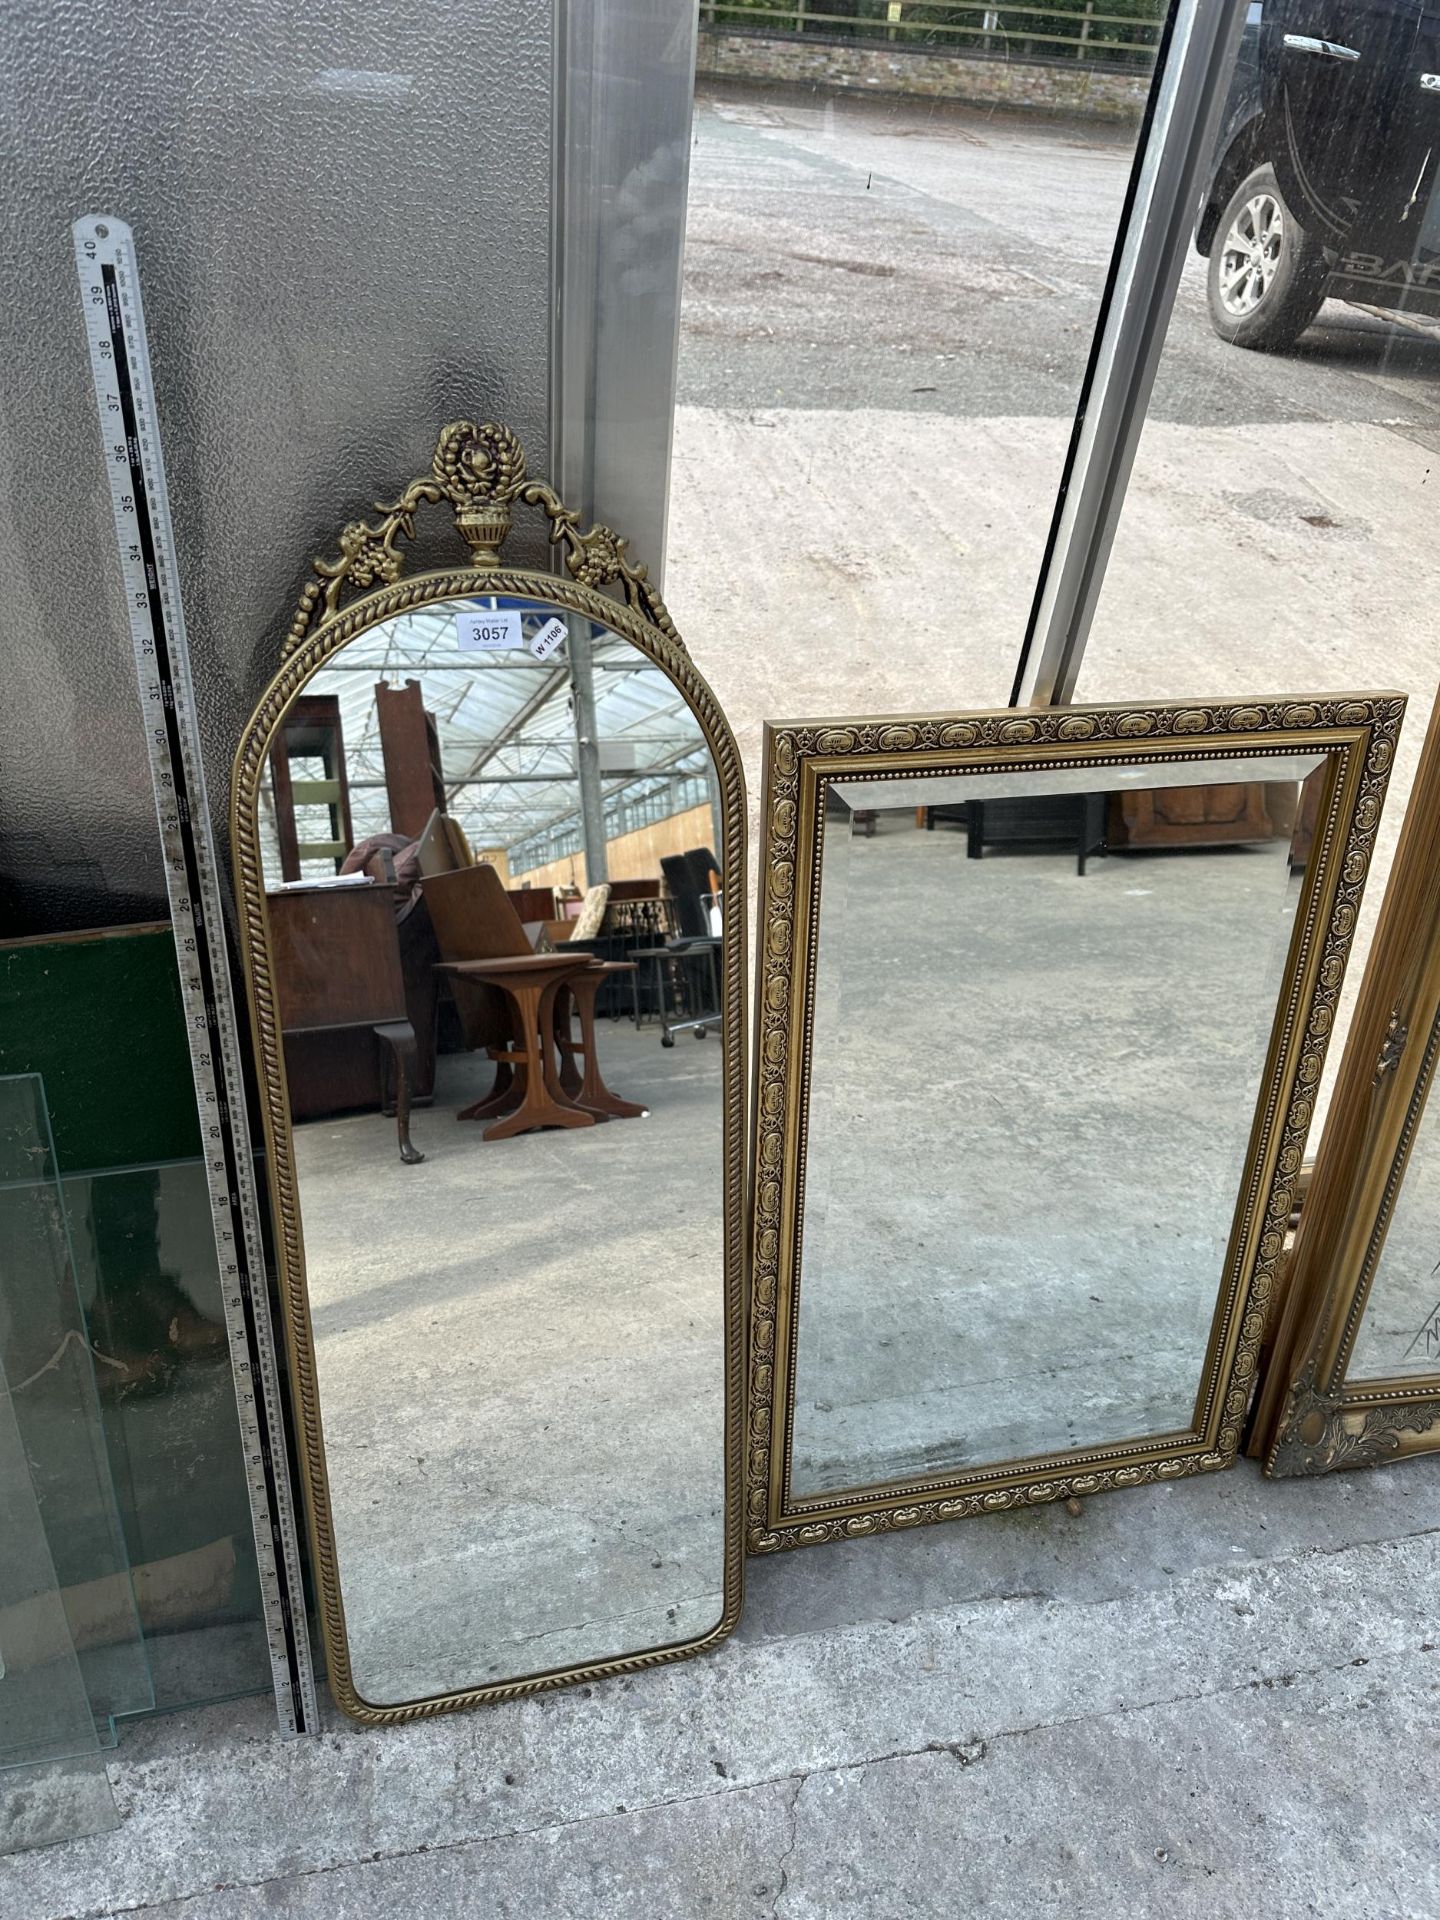 TWO GILT FRAMED MIRRORS - ONE RECTANGULAR, ONE WITH DECORATIVE ARCHED TOP